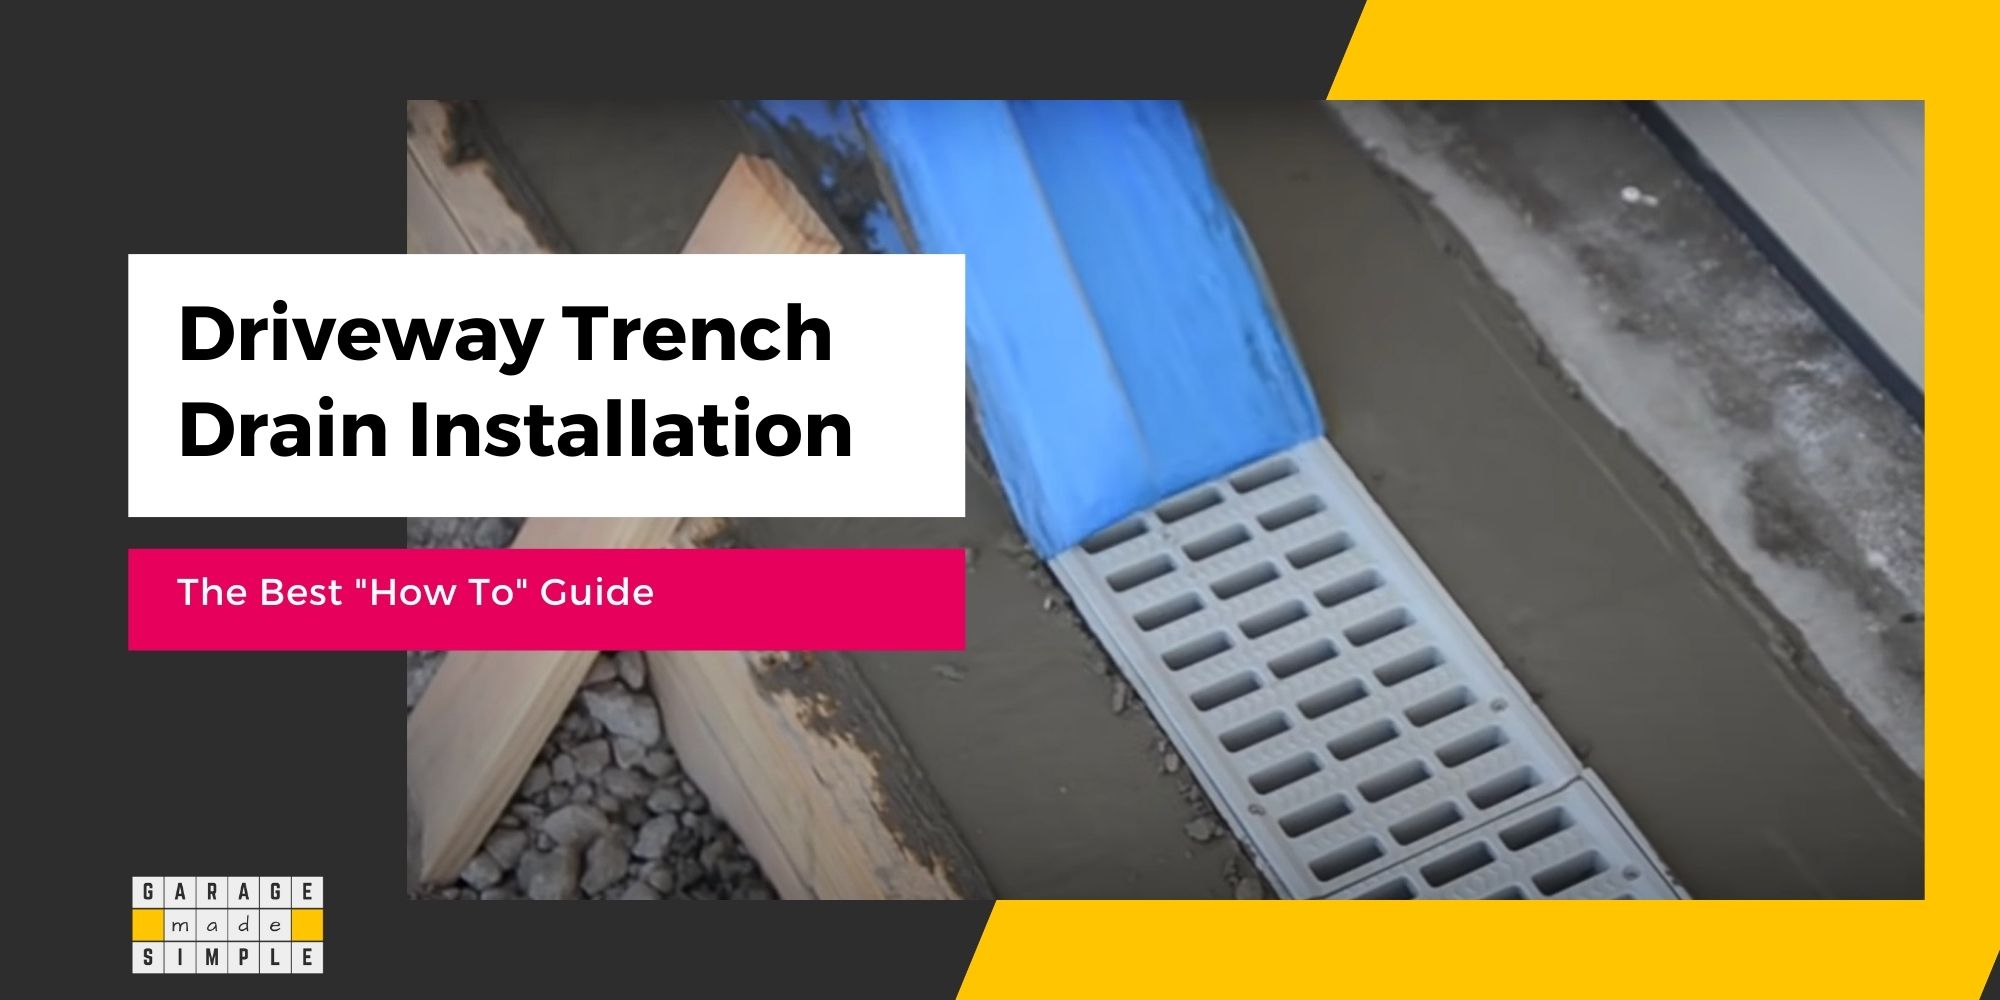 The Best Driveway Trench Drain Installation (A “How To” Guide!)